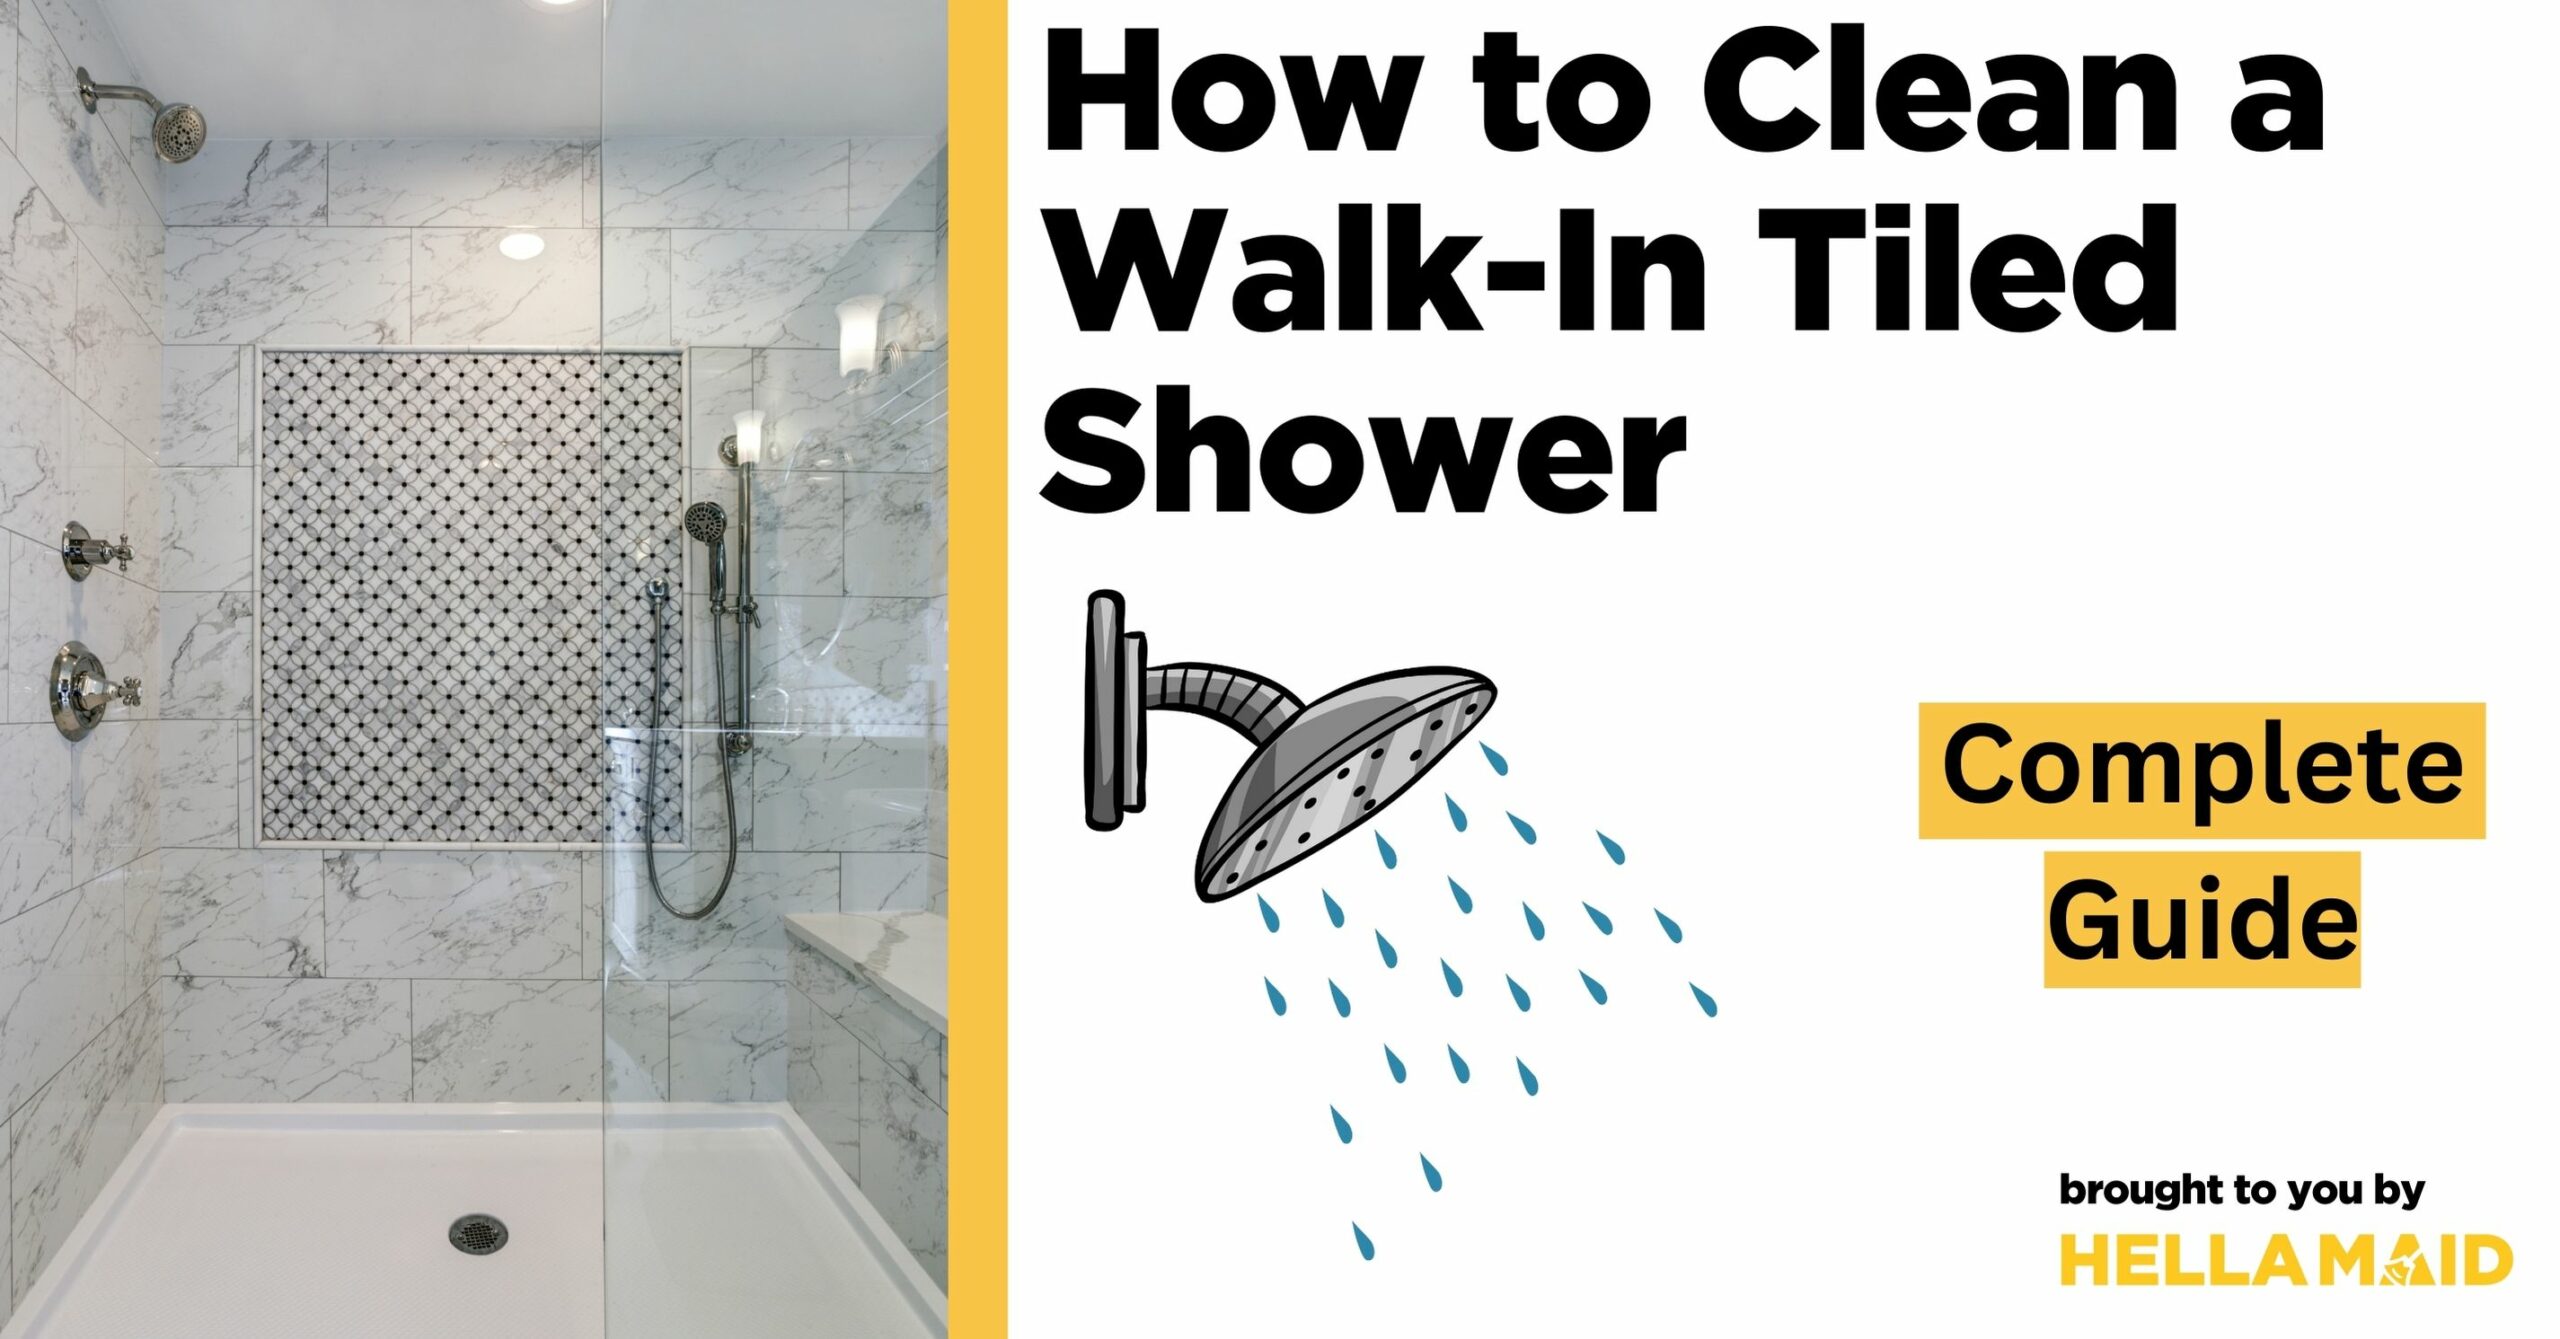 how to clean a walk-in tiled shower